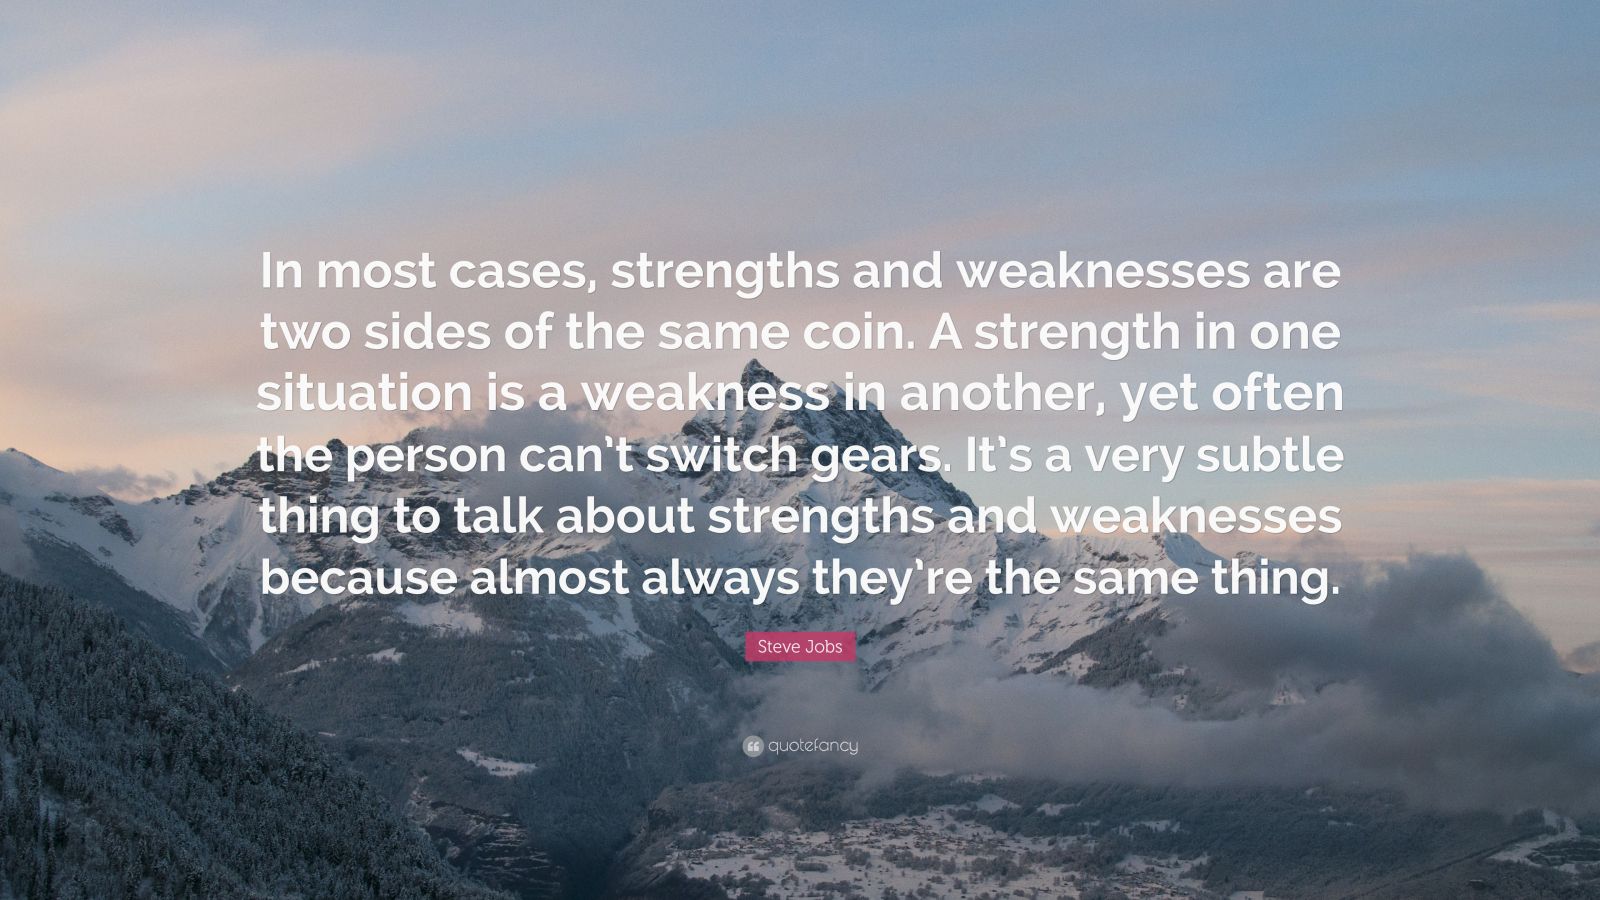 Steve Jobs Quote: “In most cases, strengths and weaknesses are two ...